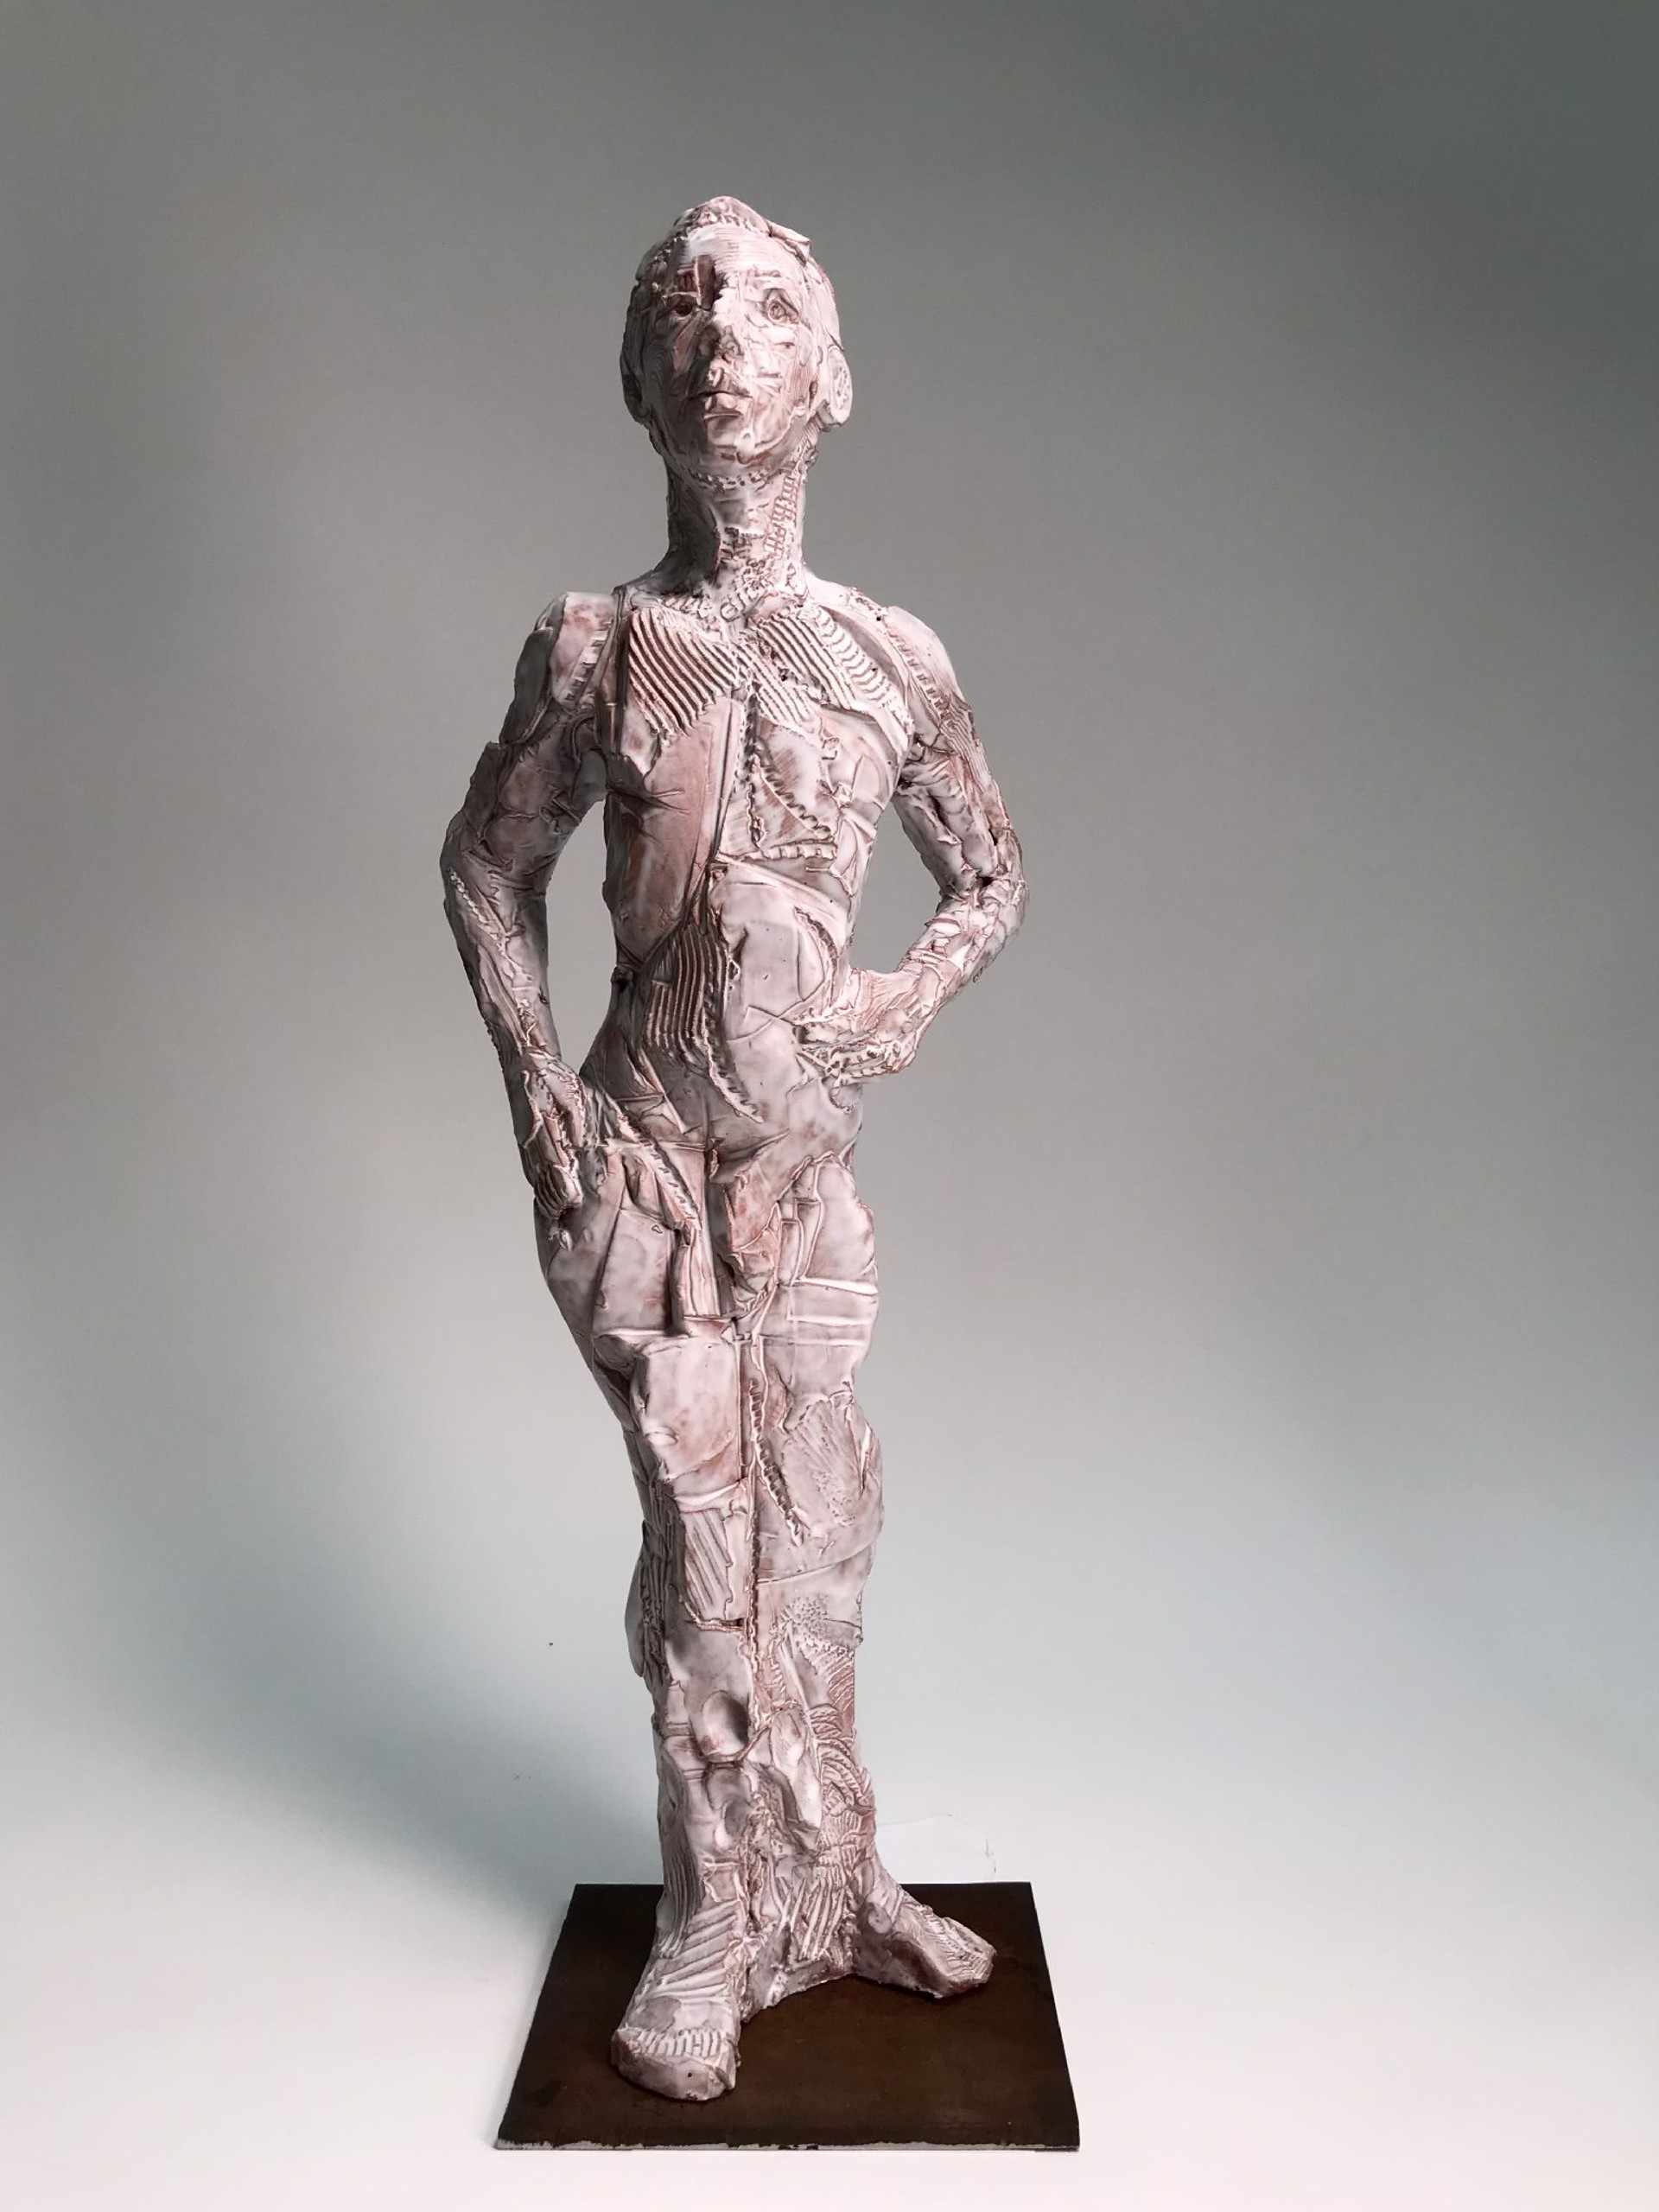 Untitled Figure 4 by Michael O'Keefe